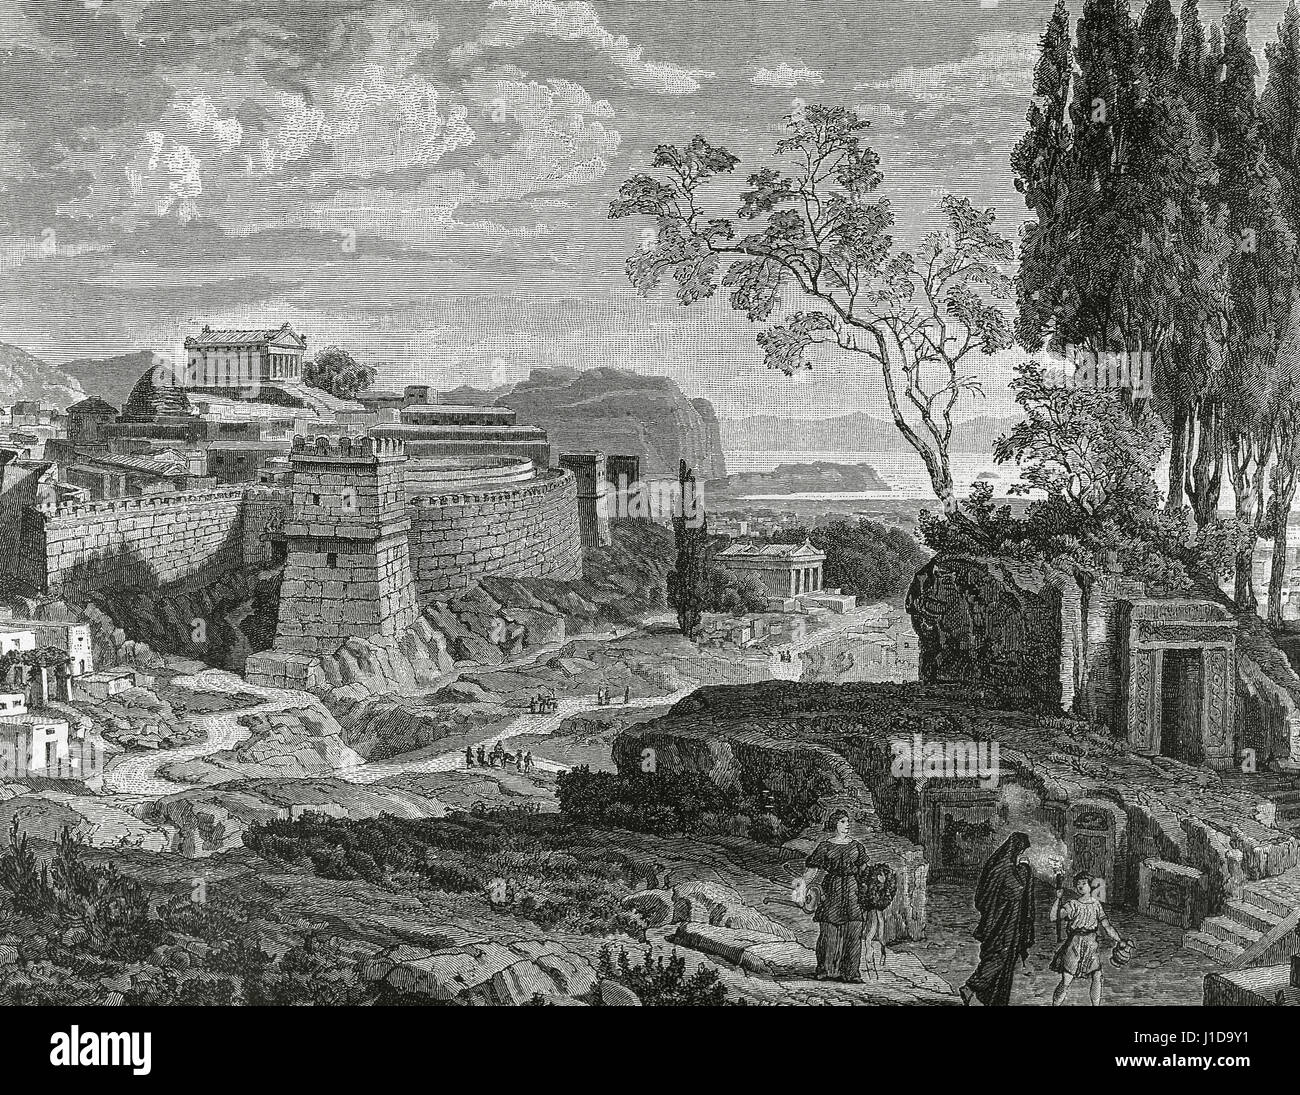 Ancient Greece. City of Mycenae. The Altar of Hera to the right and the castle to the left. In the background, the port and the Nauplia bay. Engraving. 19th century. Stock Photo